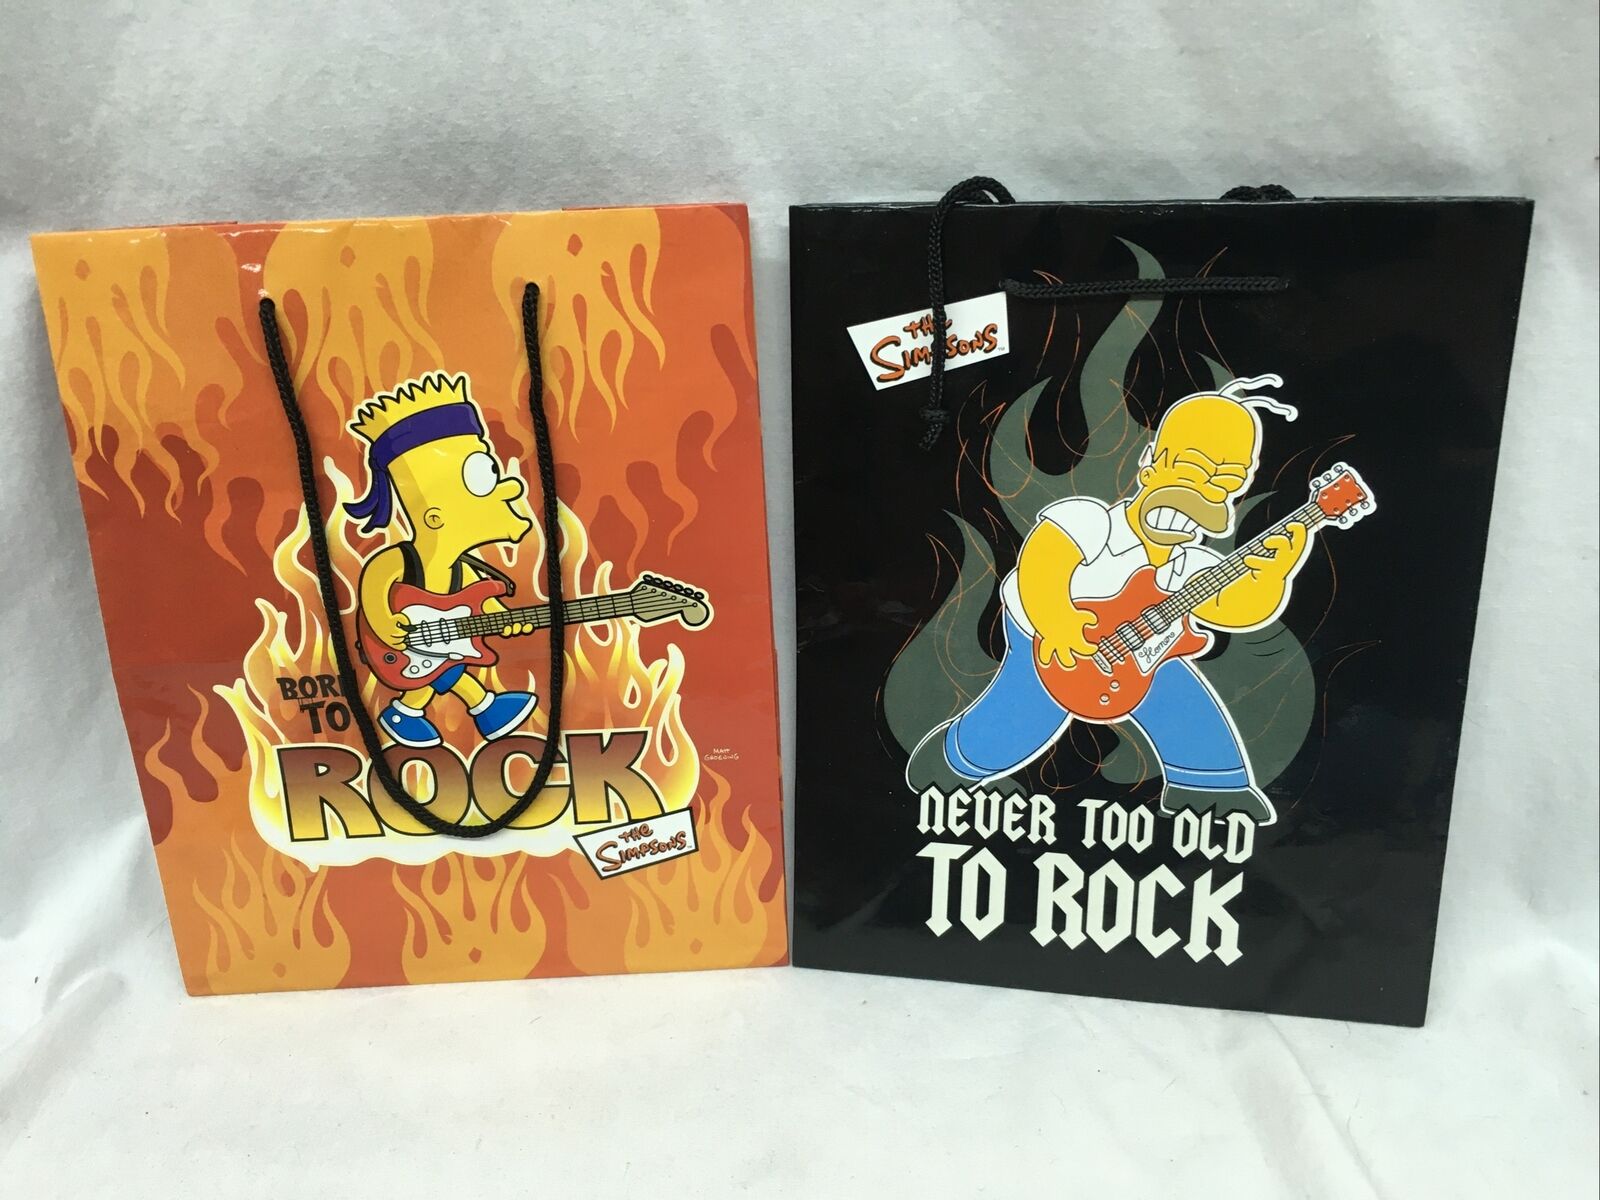 The Simpsons - Homer “Never Too Old To Rock” & Bart “Born to Rock” Gift Bags